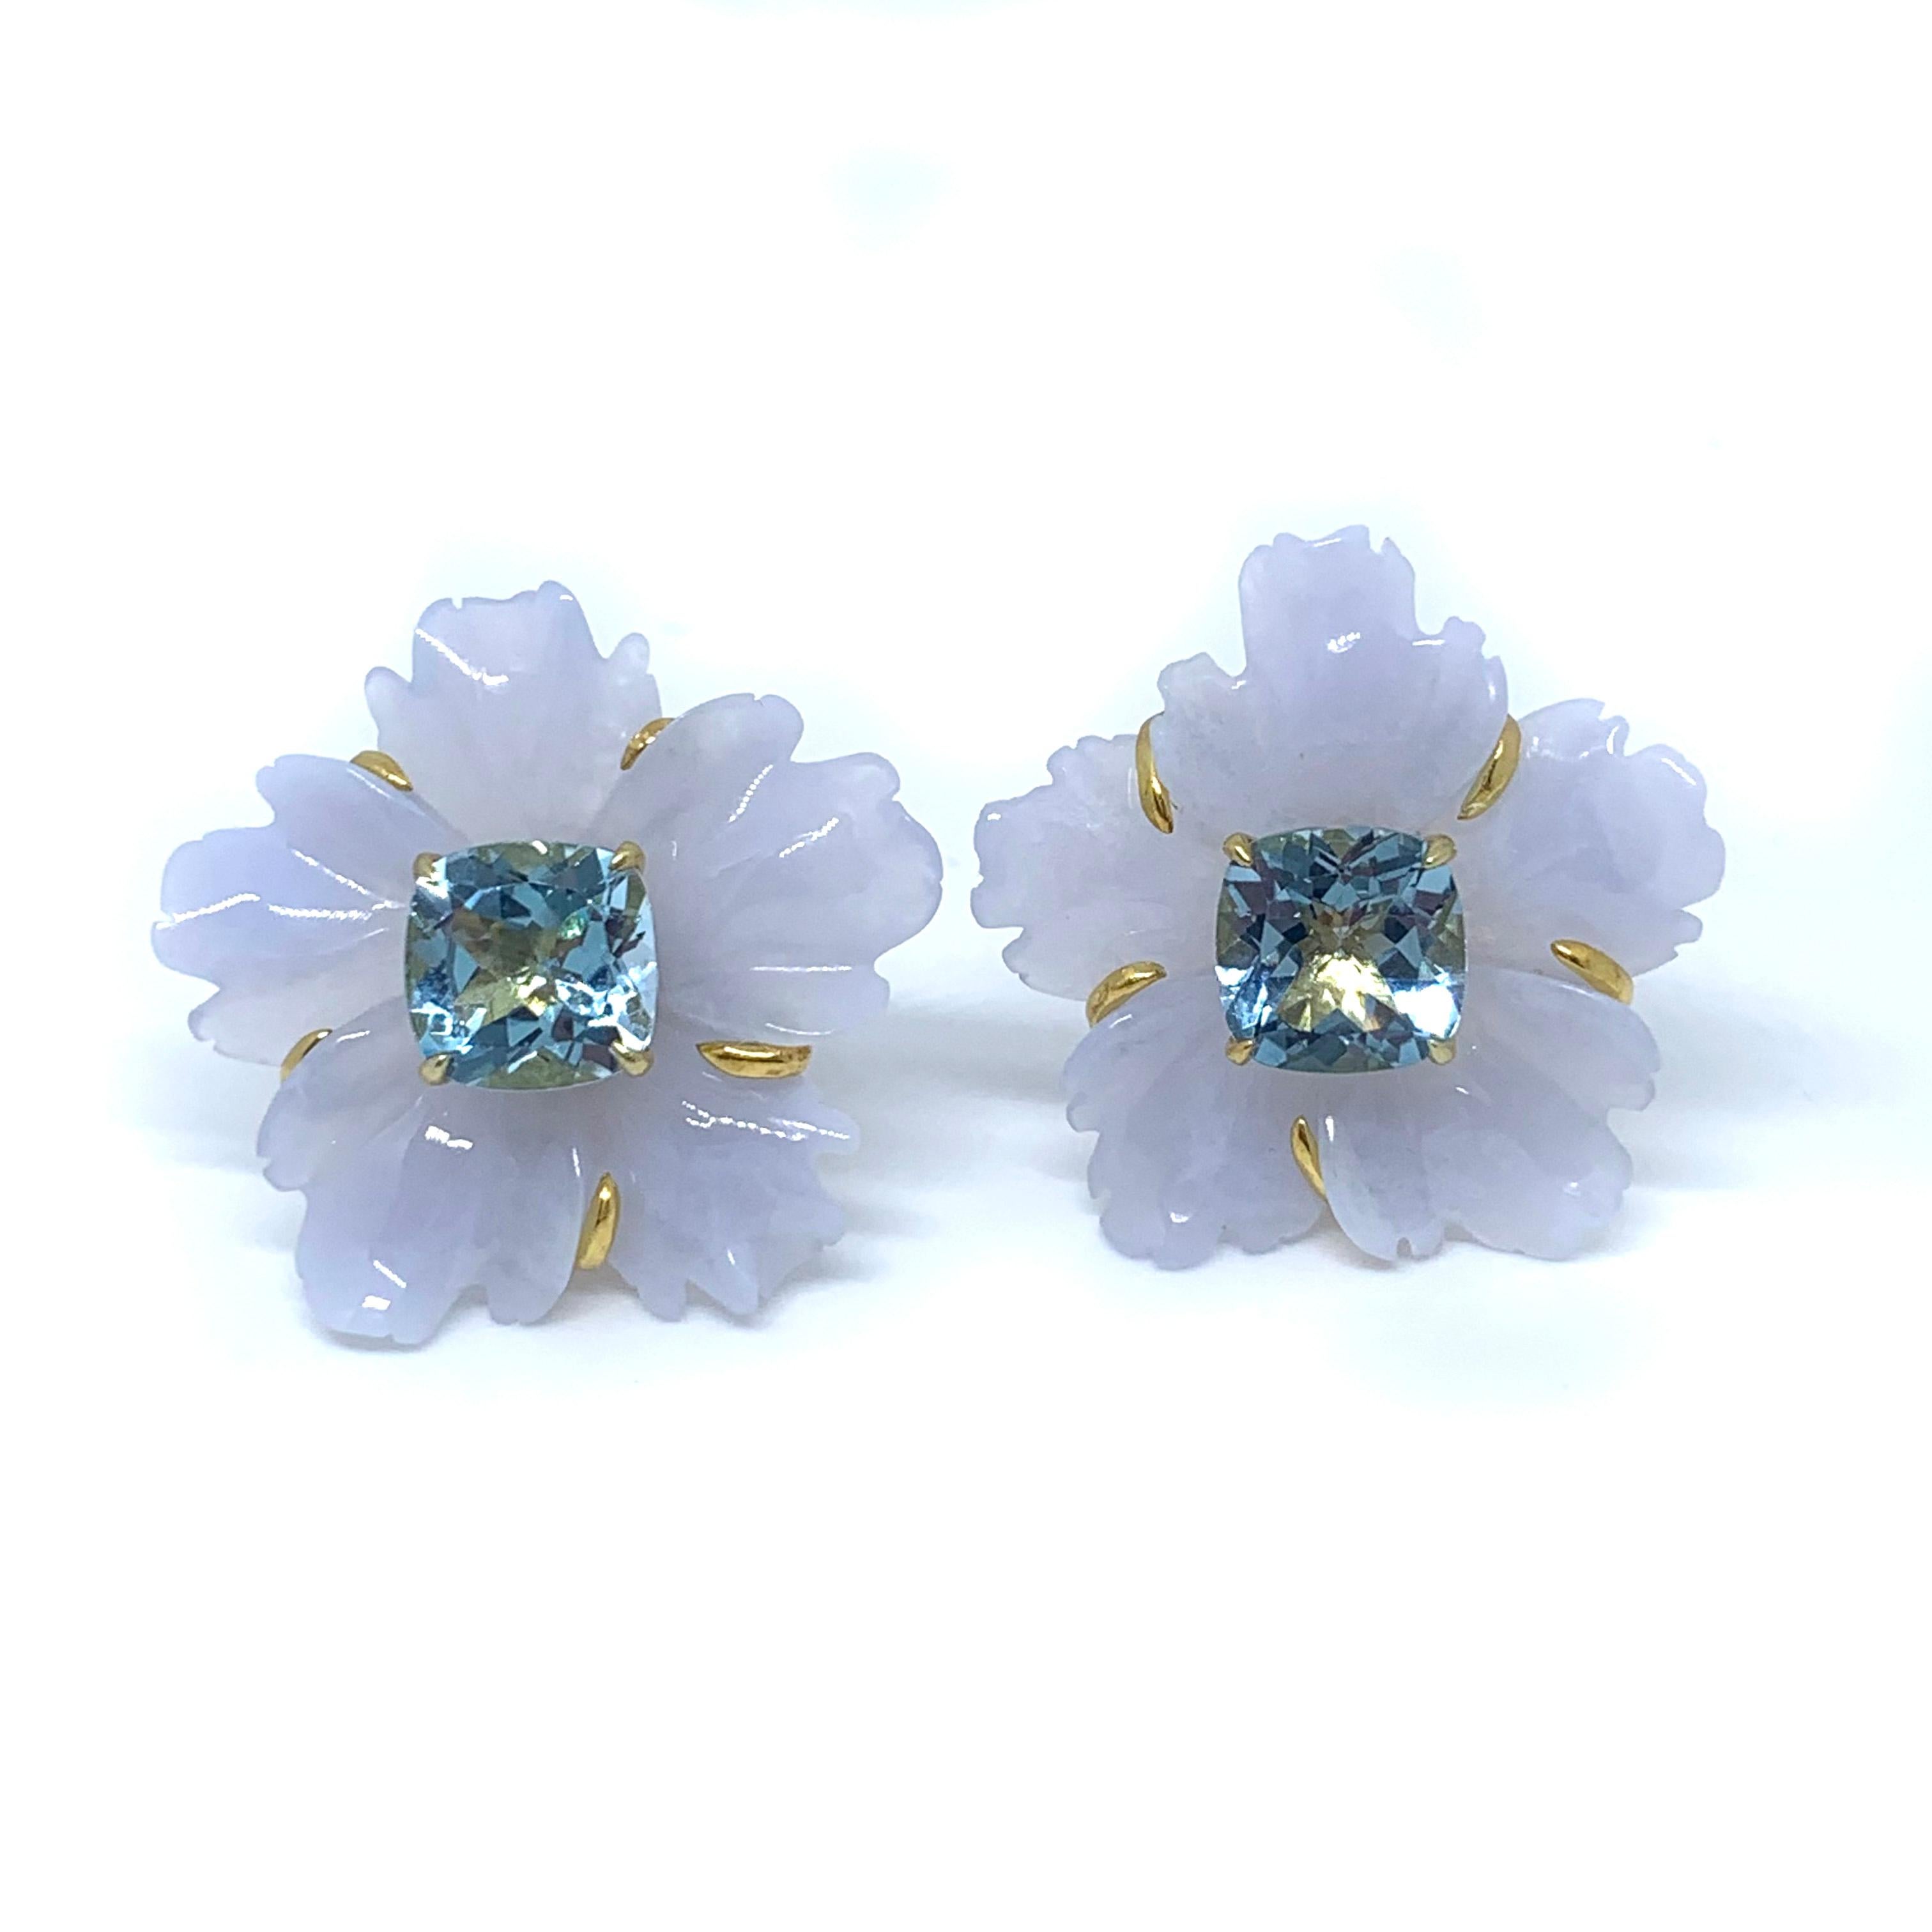 Elegant 25mm Carved Chalcedony Flower and Cushion Blue Topaz Vermeil Earrings

This gorgeous pair of earrings features 25mm chalcedony carved into beautiful three dimension flower, adorned with cushion-cut sky blue topaz (3 carat size) in the